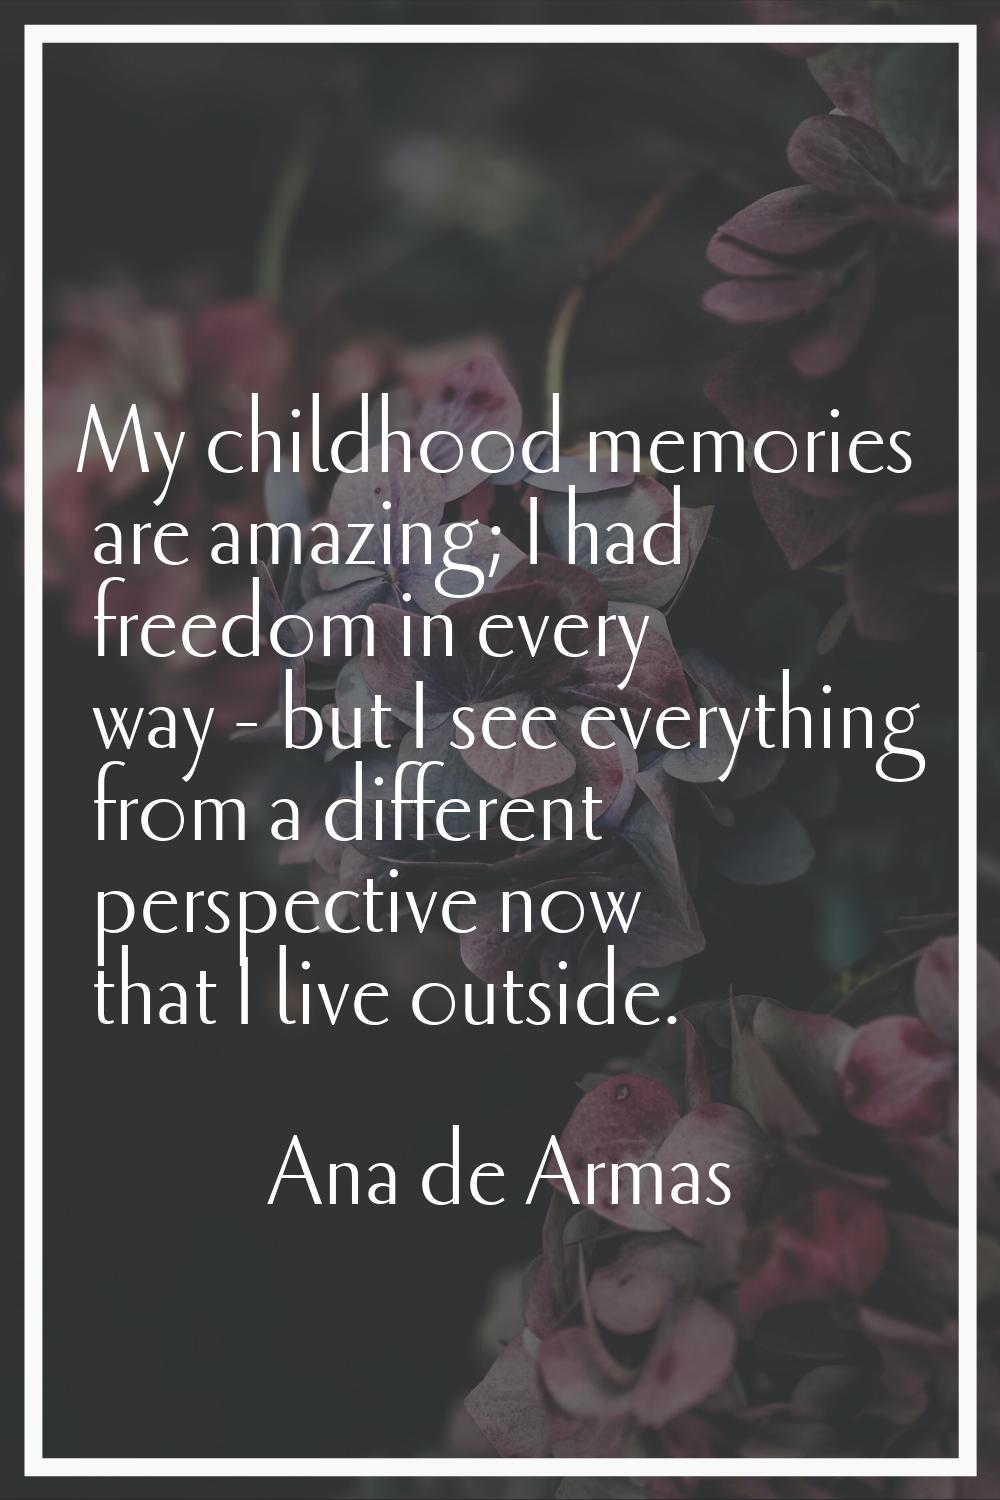 My childhood memories are amazing; I had freedom in every way - but I see everything from a differe